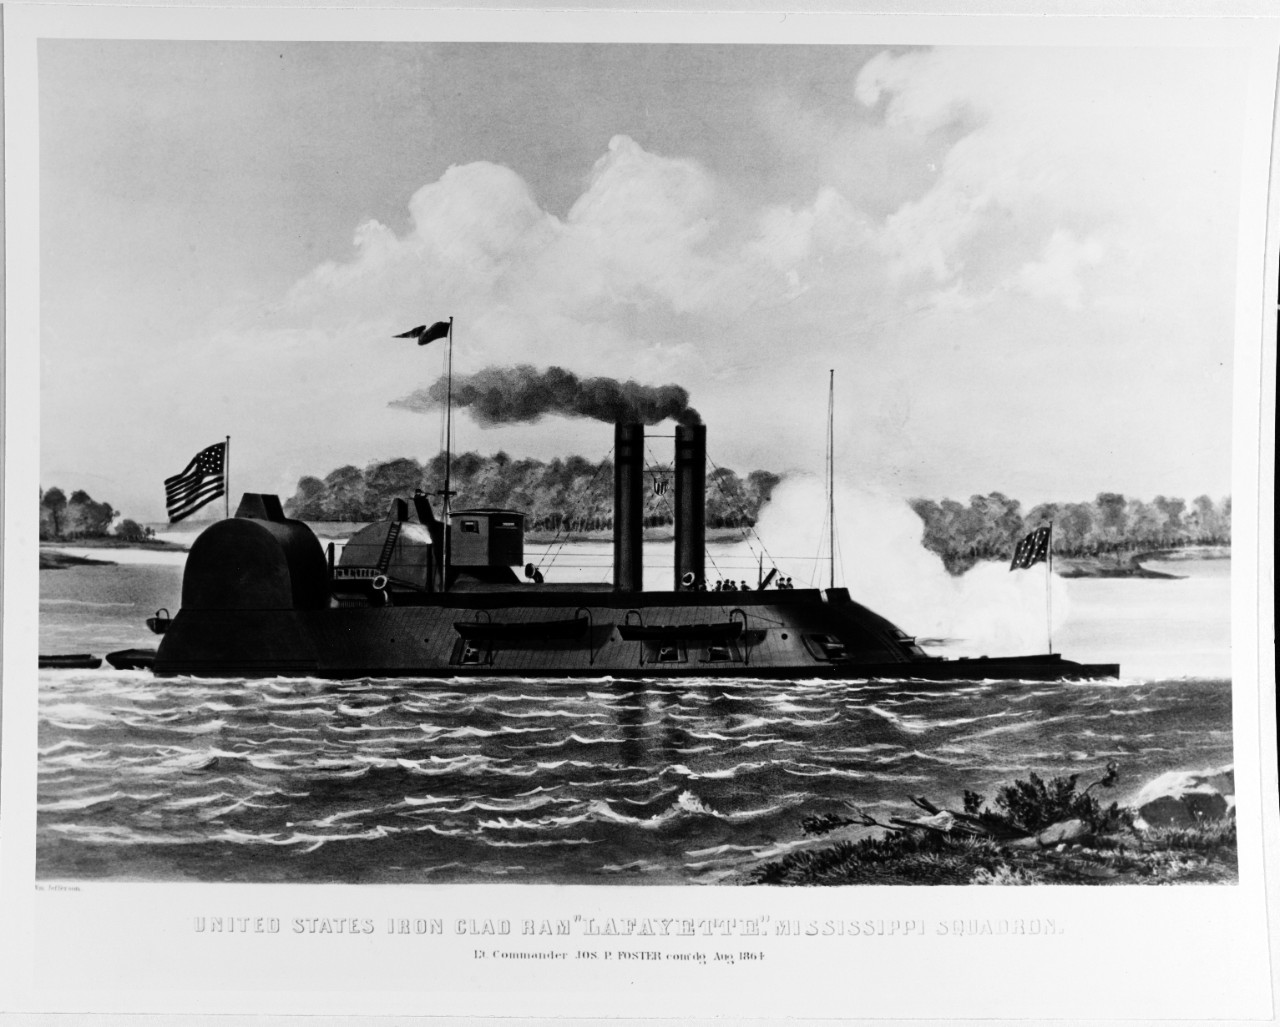 Photo #: NH 69897-KN &quot;United States Iron Clad Ram 'Lafayette'. Mississippi Squadron.&quot;